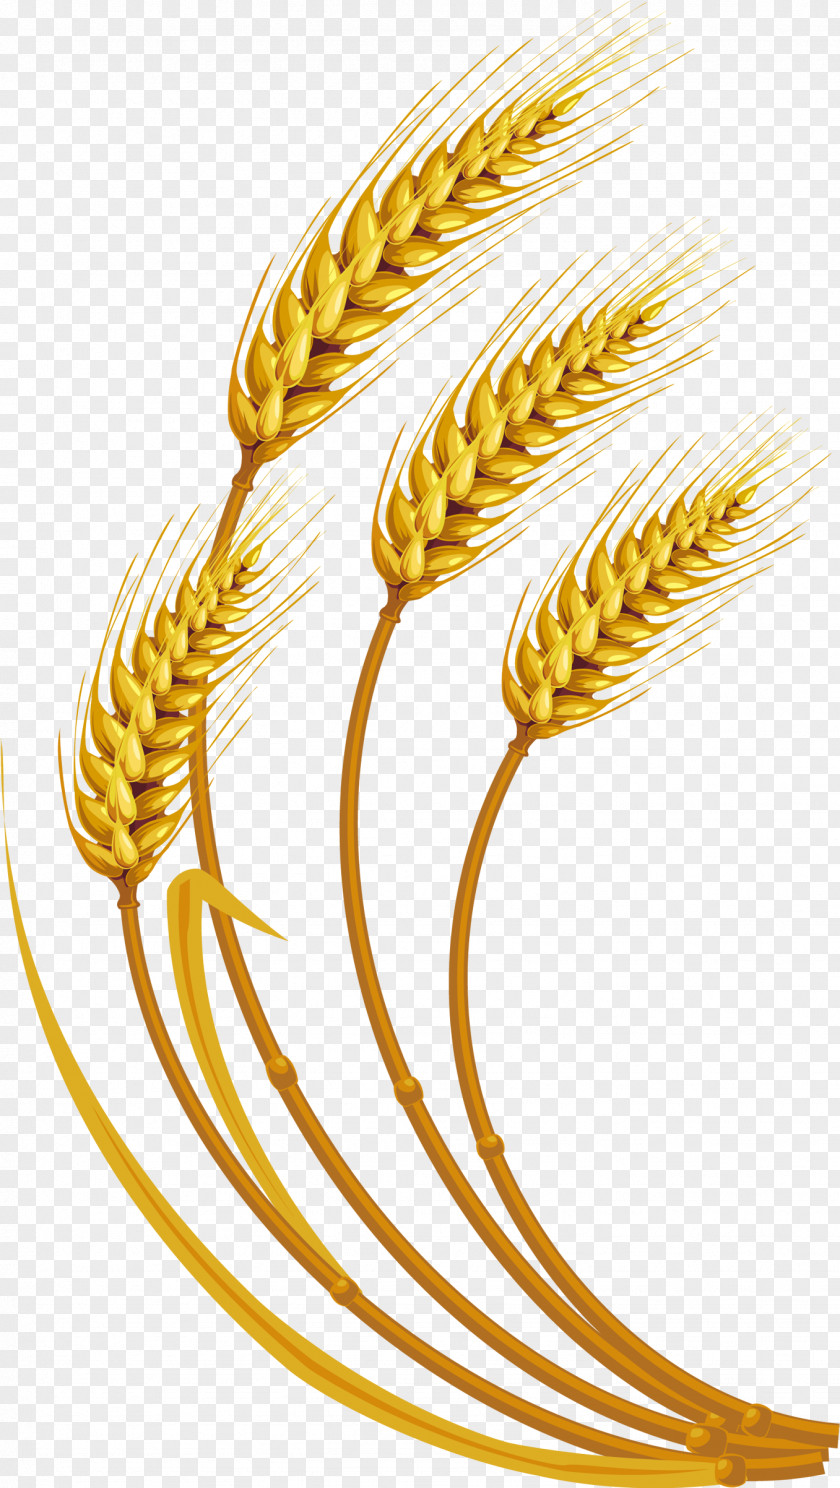 Wheat Grauds Cereal Clip Art PNG